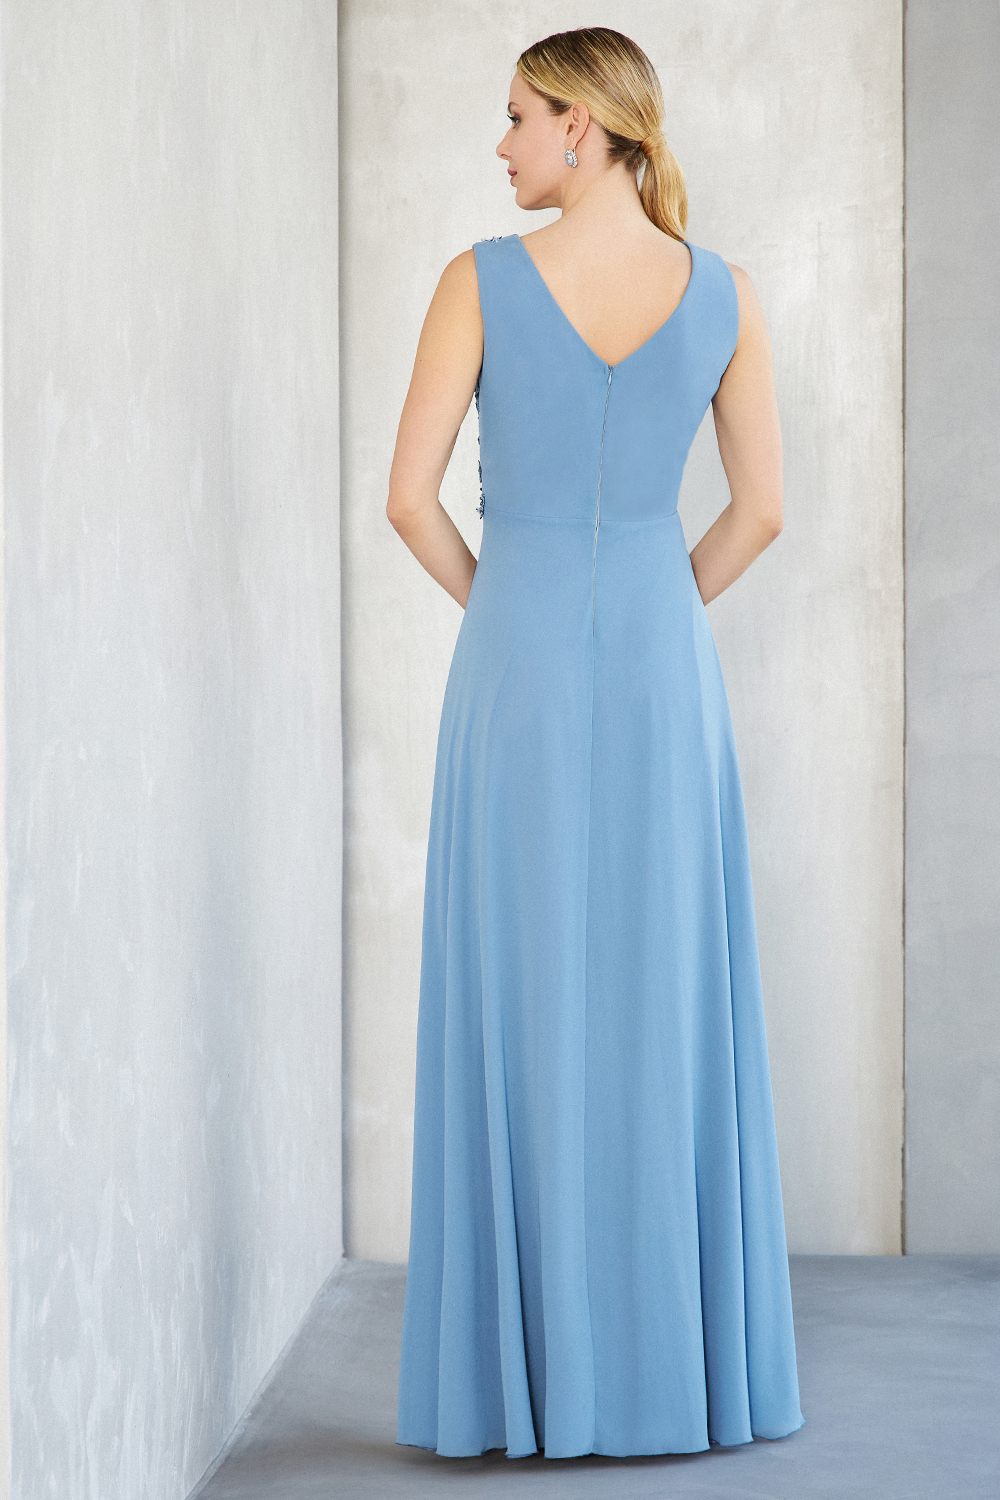 Классические платья / Long evening dress with chiffon fabric, lace top with beading and straps